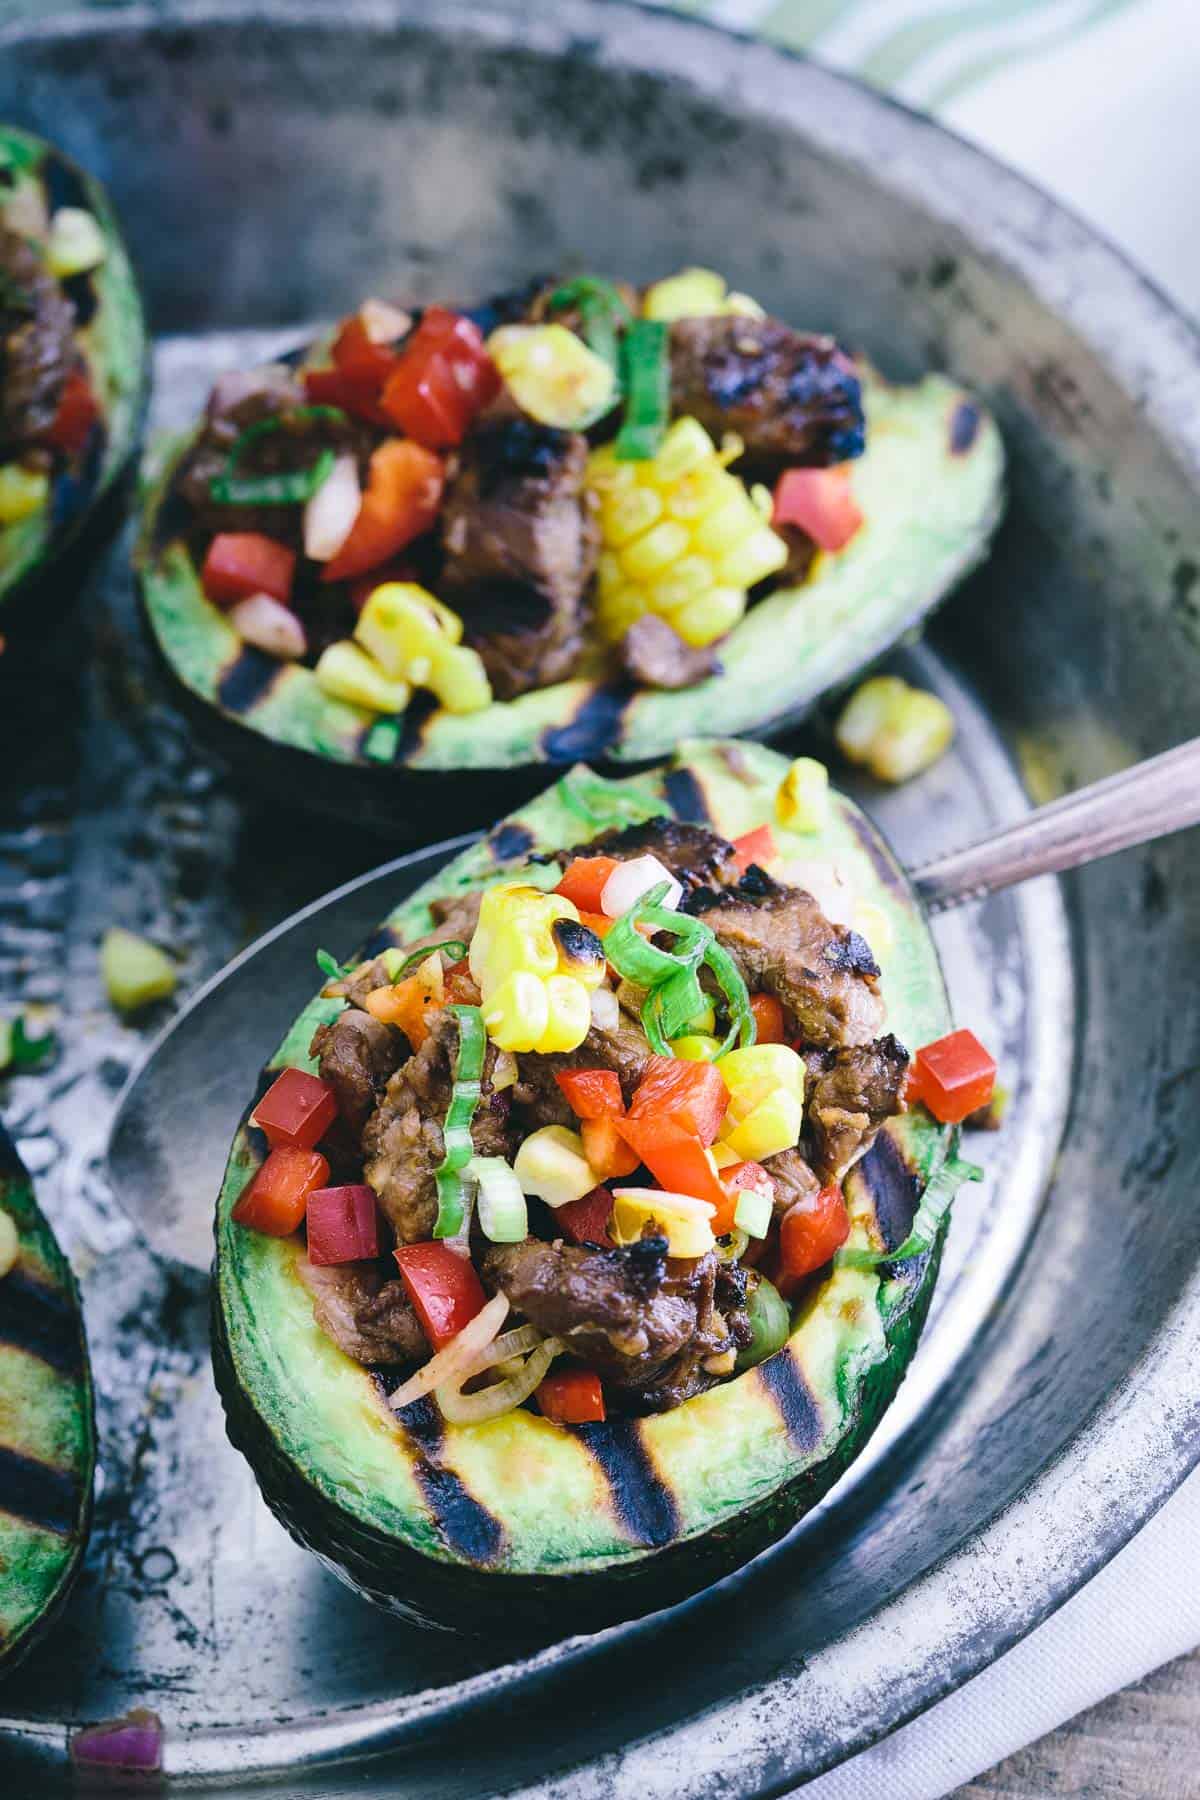 Marinate steak overnight, grill it up and stuff inside these grilled California avocados for an easy summer meal.